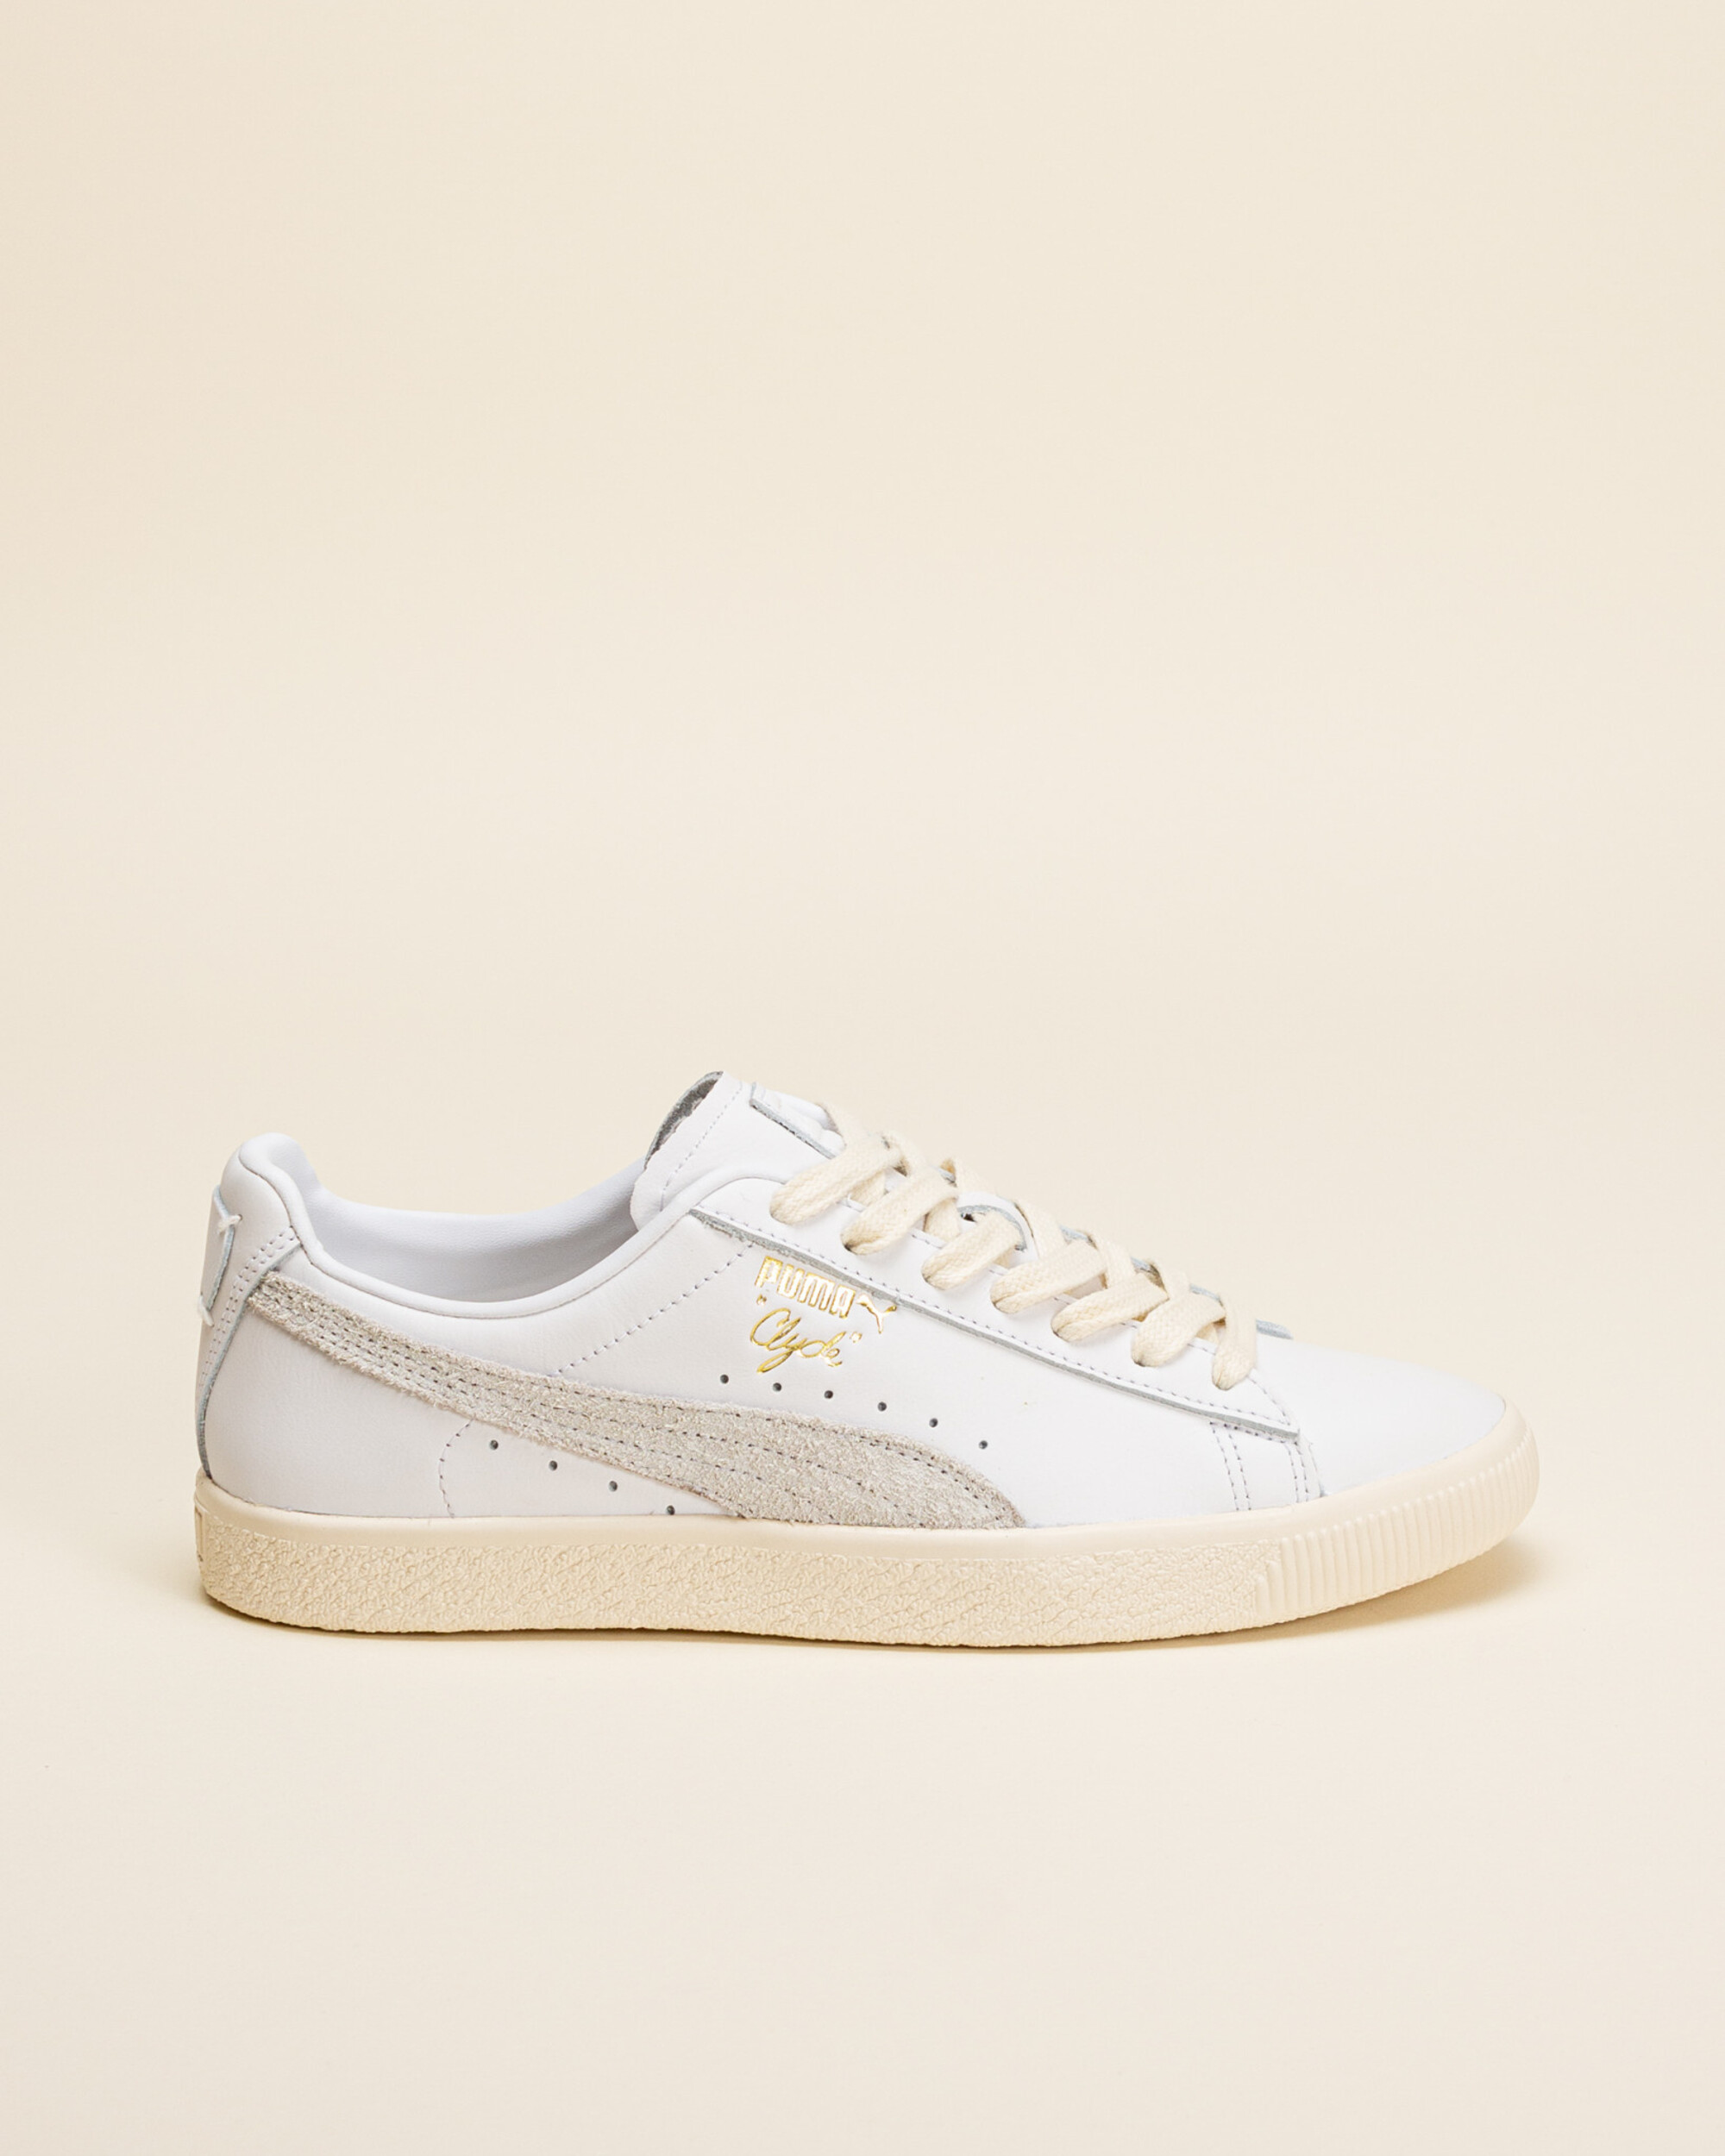 Puma Clyde Base - White/Frosted Ivory